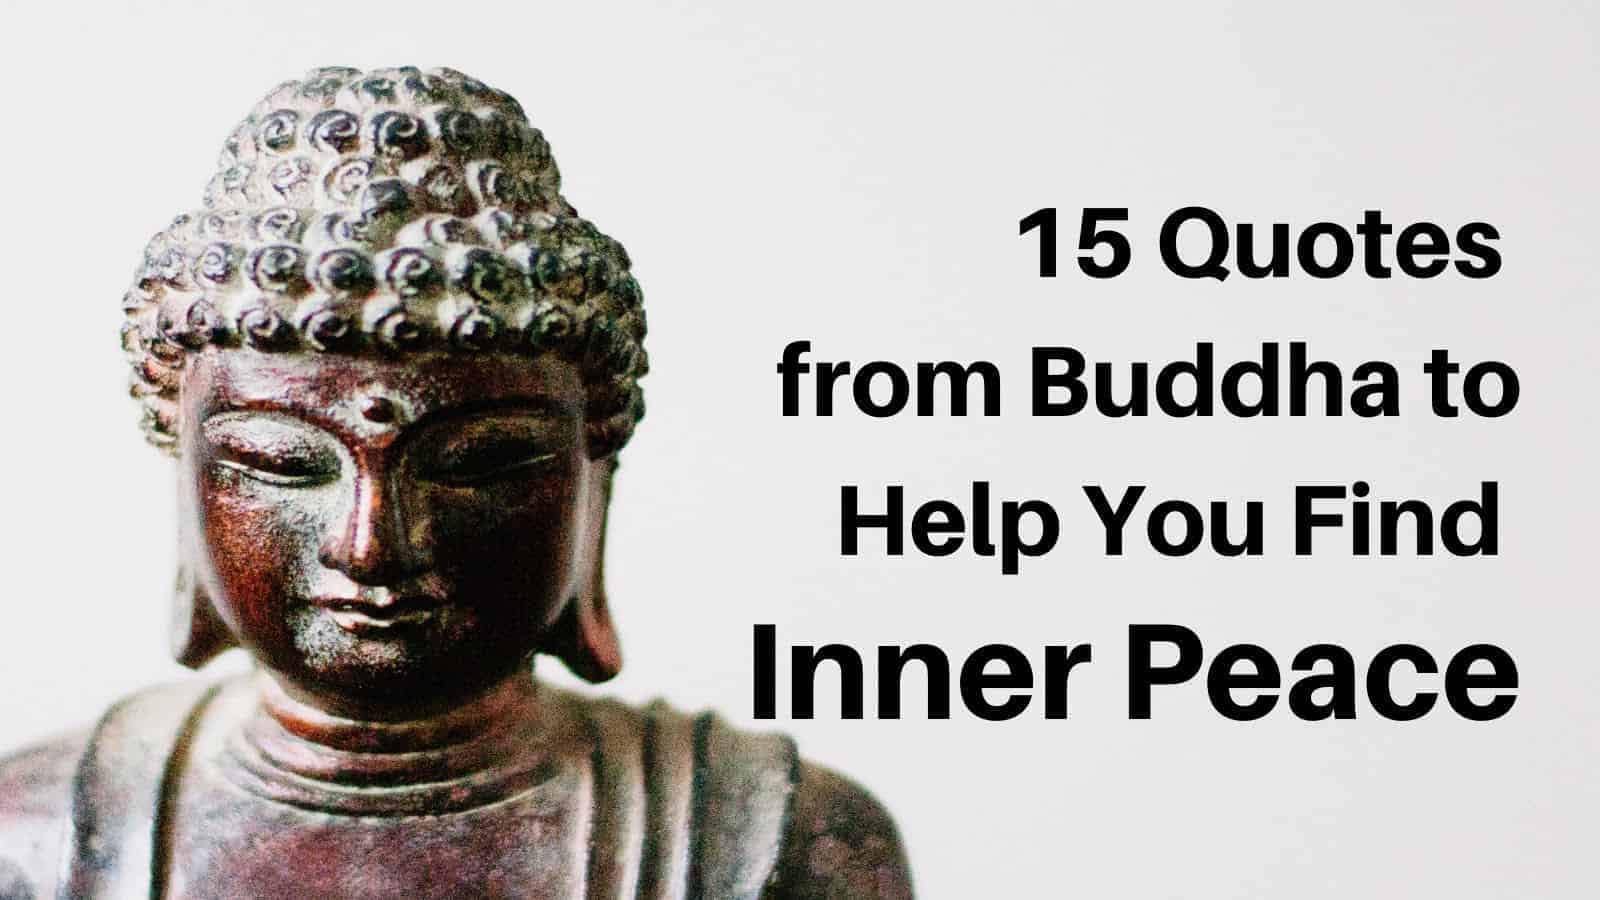 4 Effective Ways To Experience Inner Peace